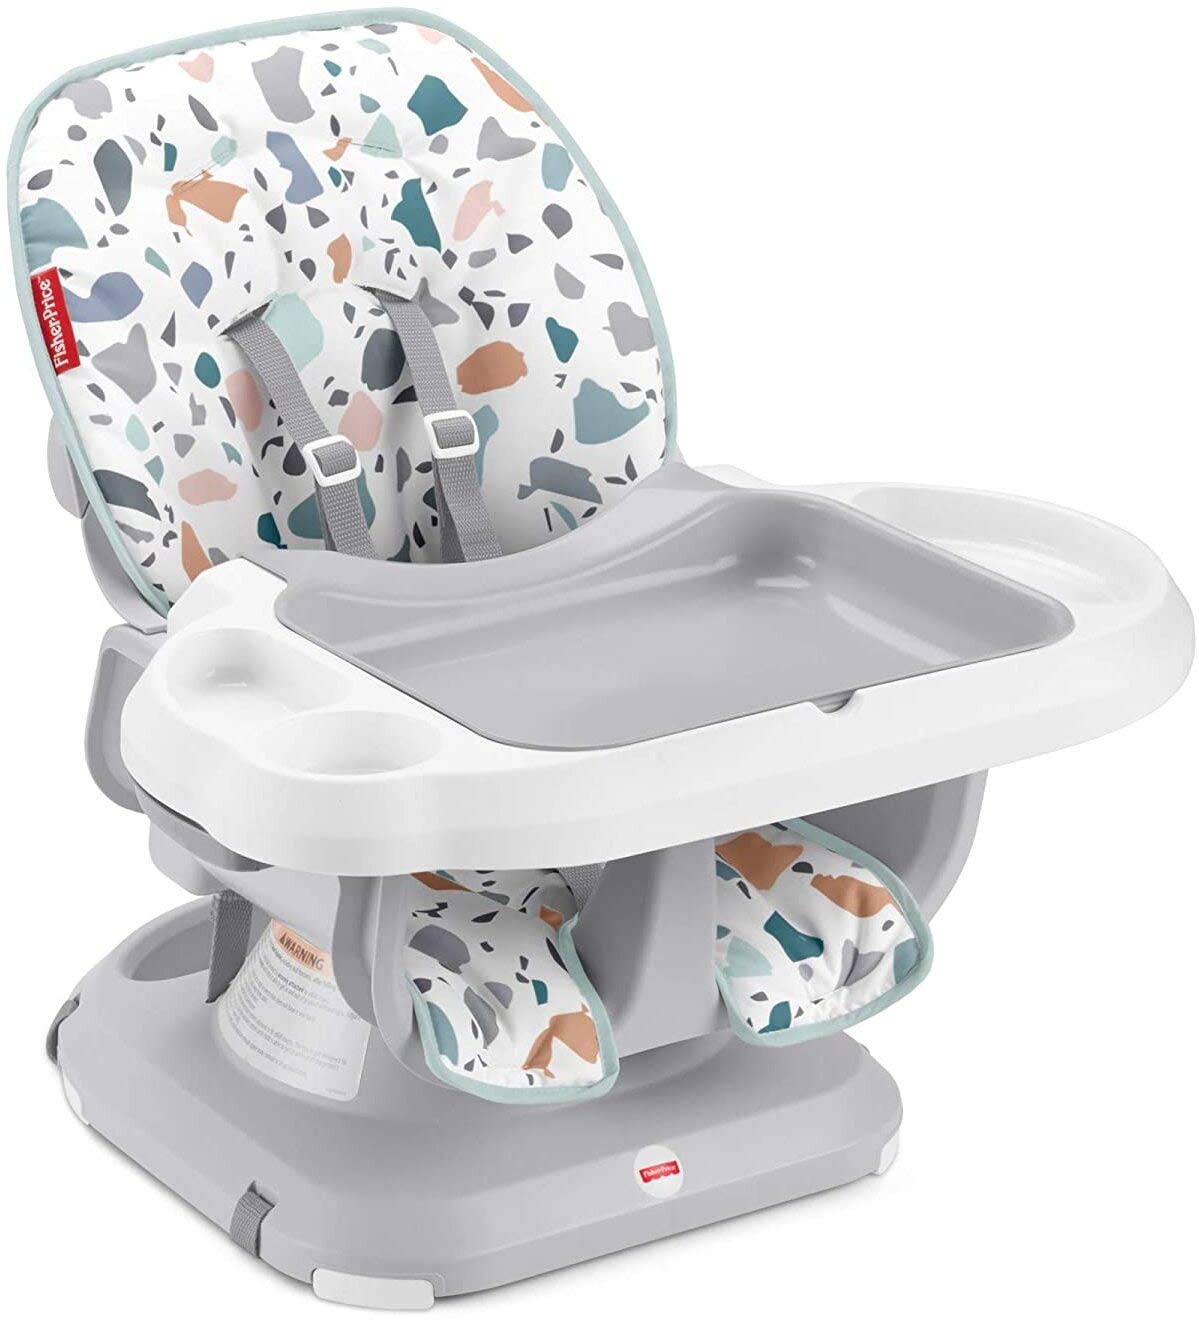 Fisher-Price SpaceSaver High Chair, Pacific Pebble - with 3 Recline Positions, 2 Height Positions, and 4 Tummy Adjustments